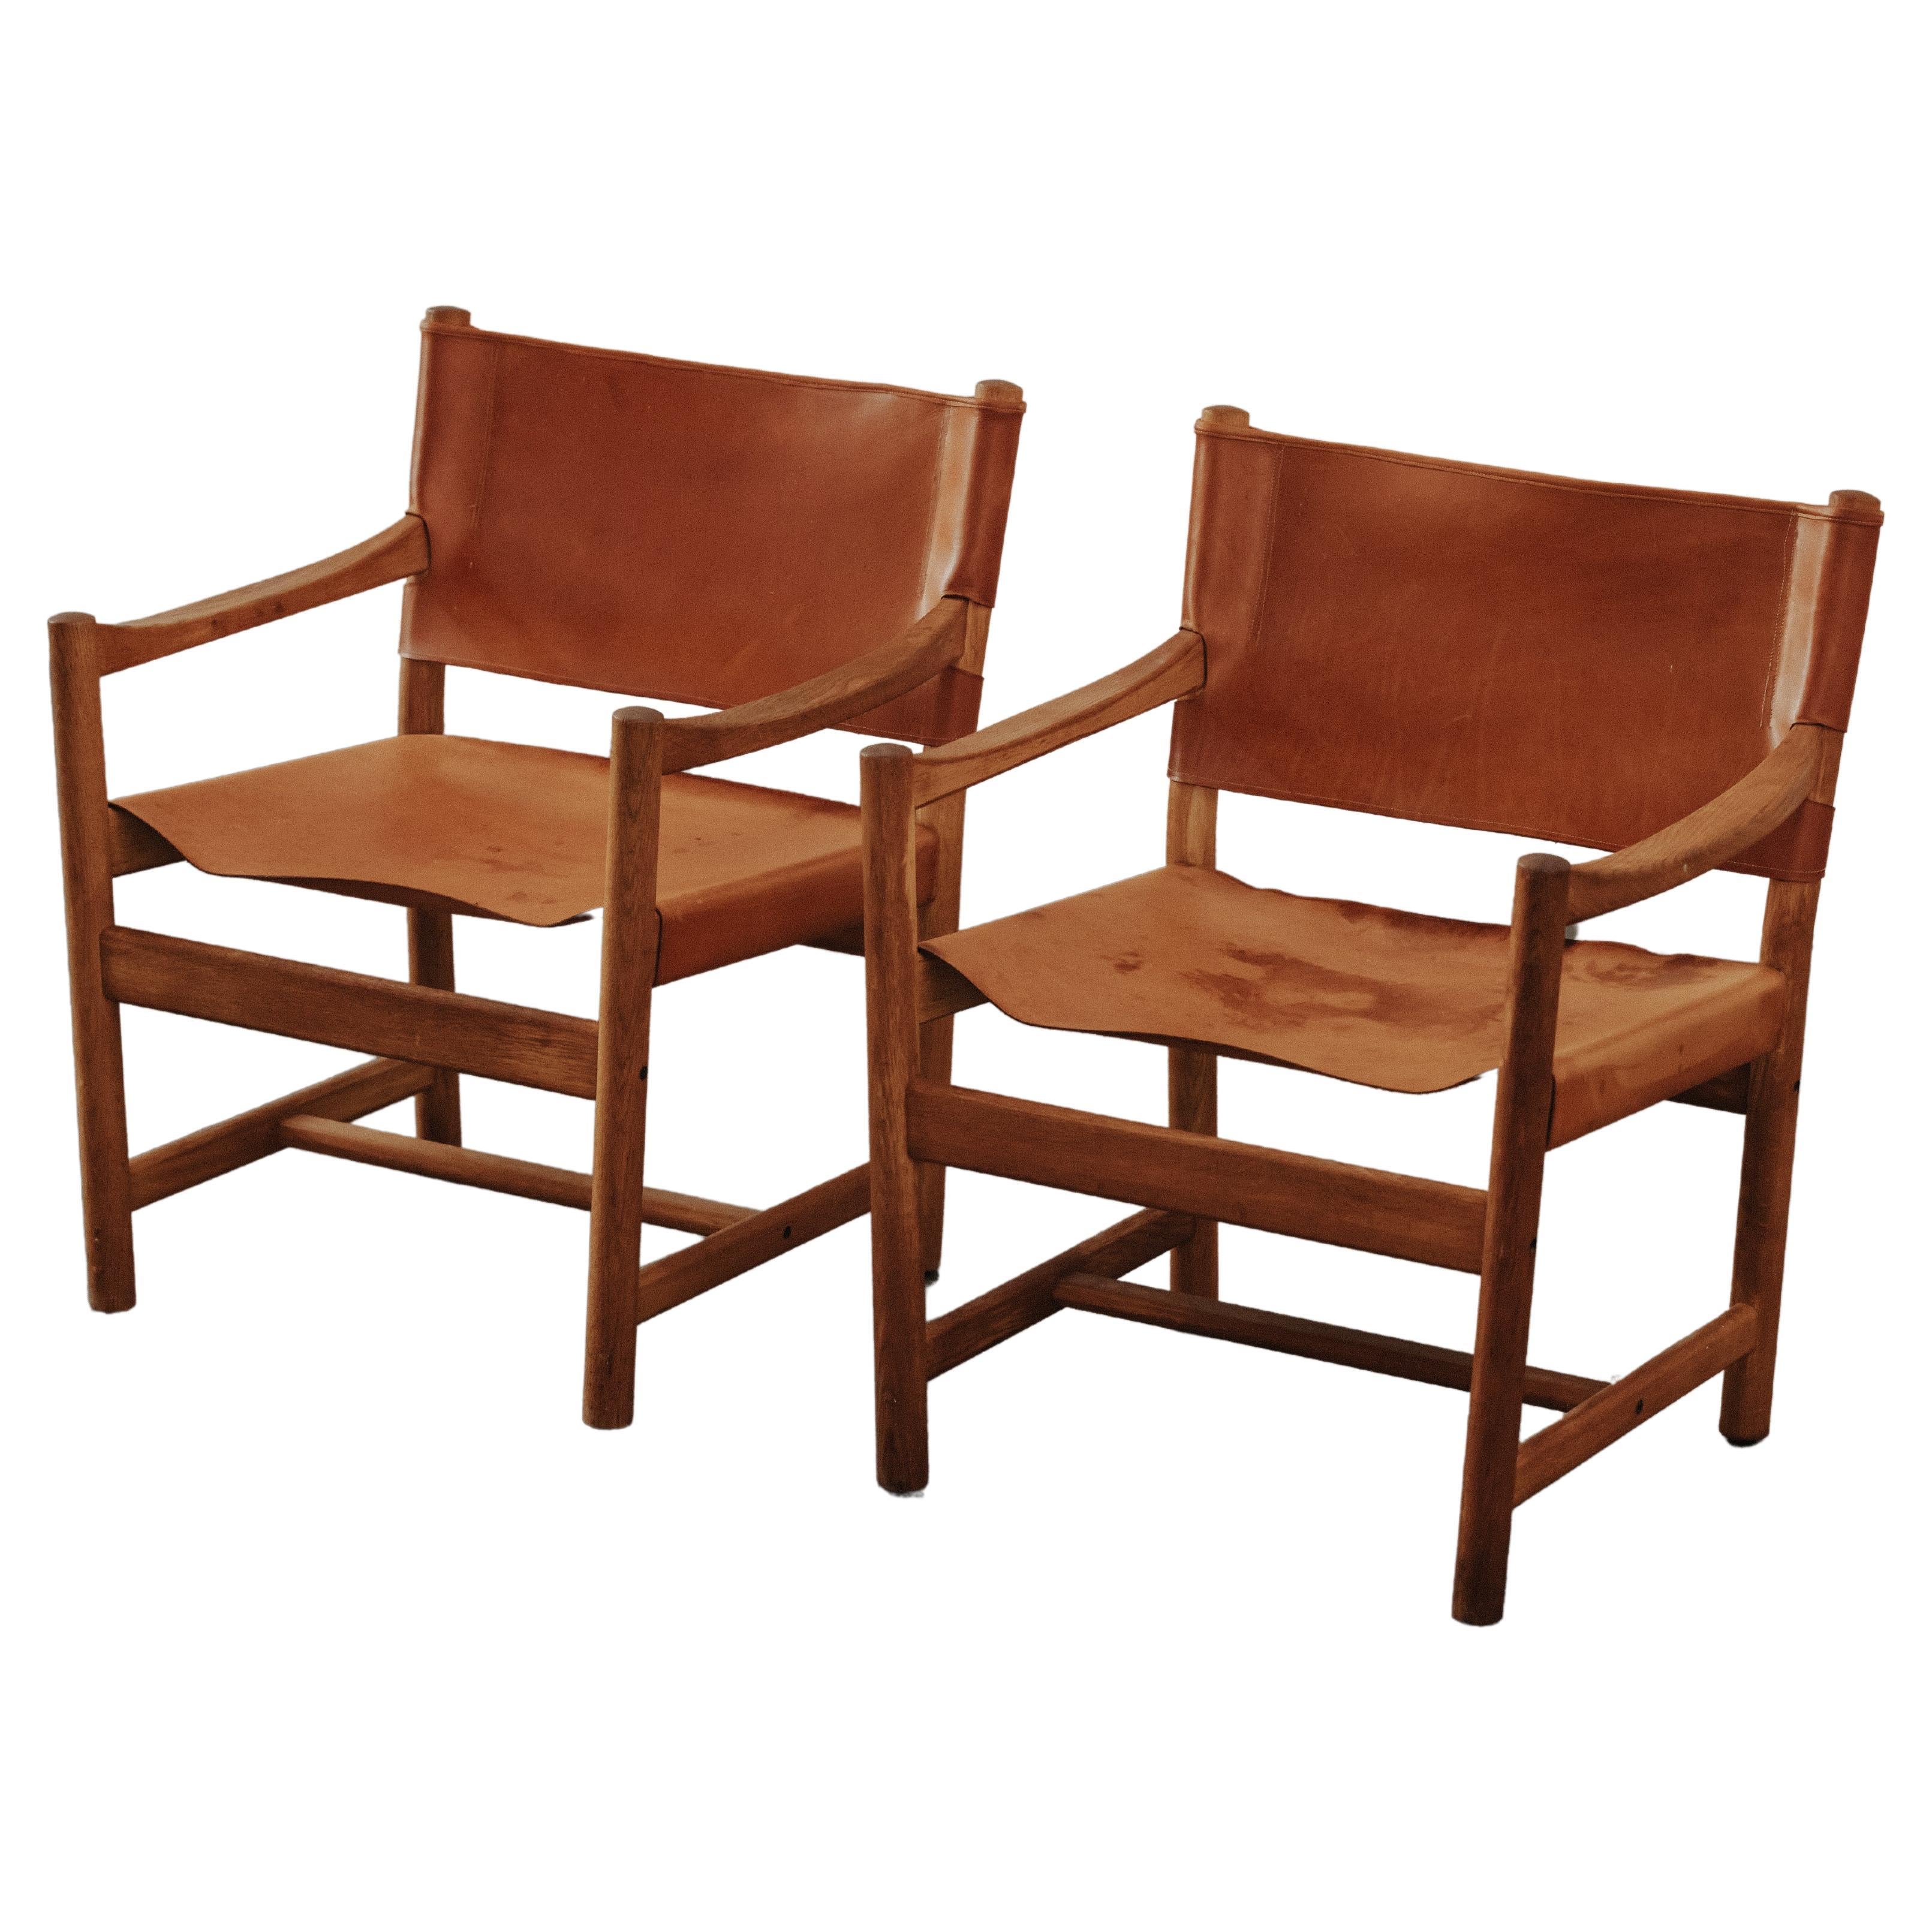 Vintage Pair Of Cognac Leather Lounge Chairs From Denmark, Circa 1970